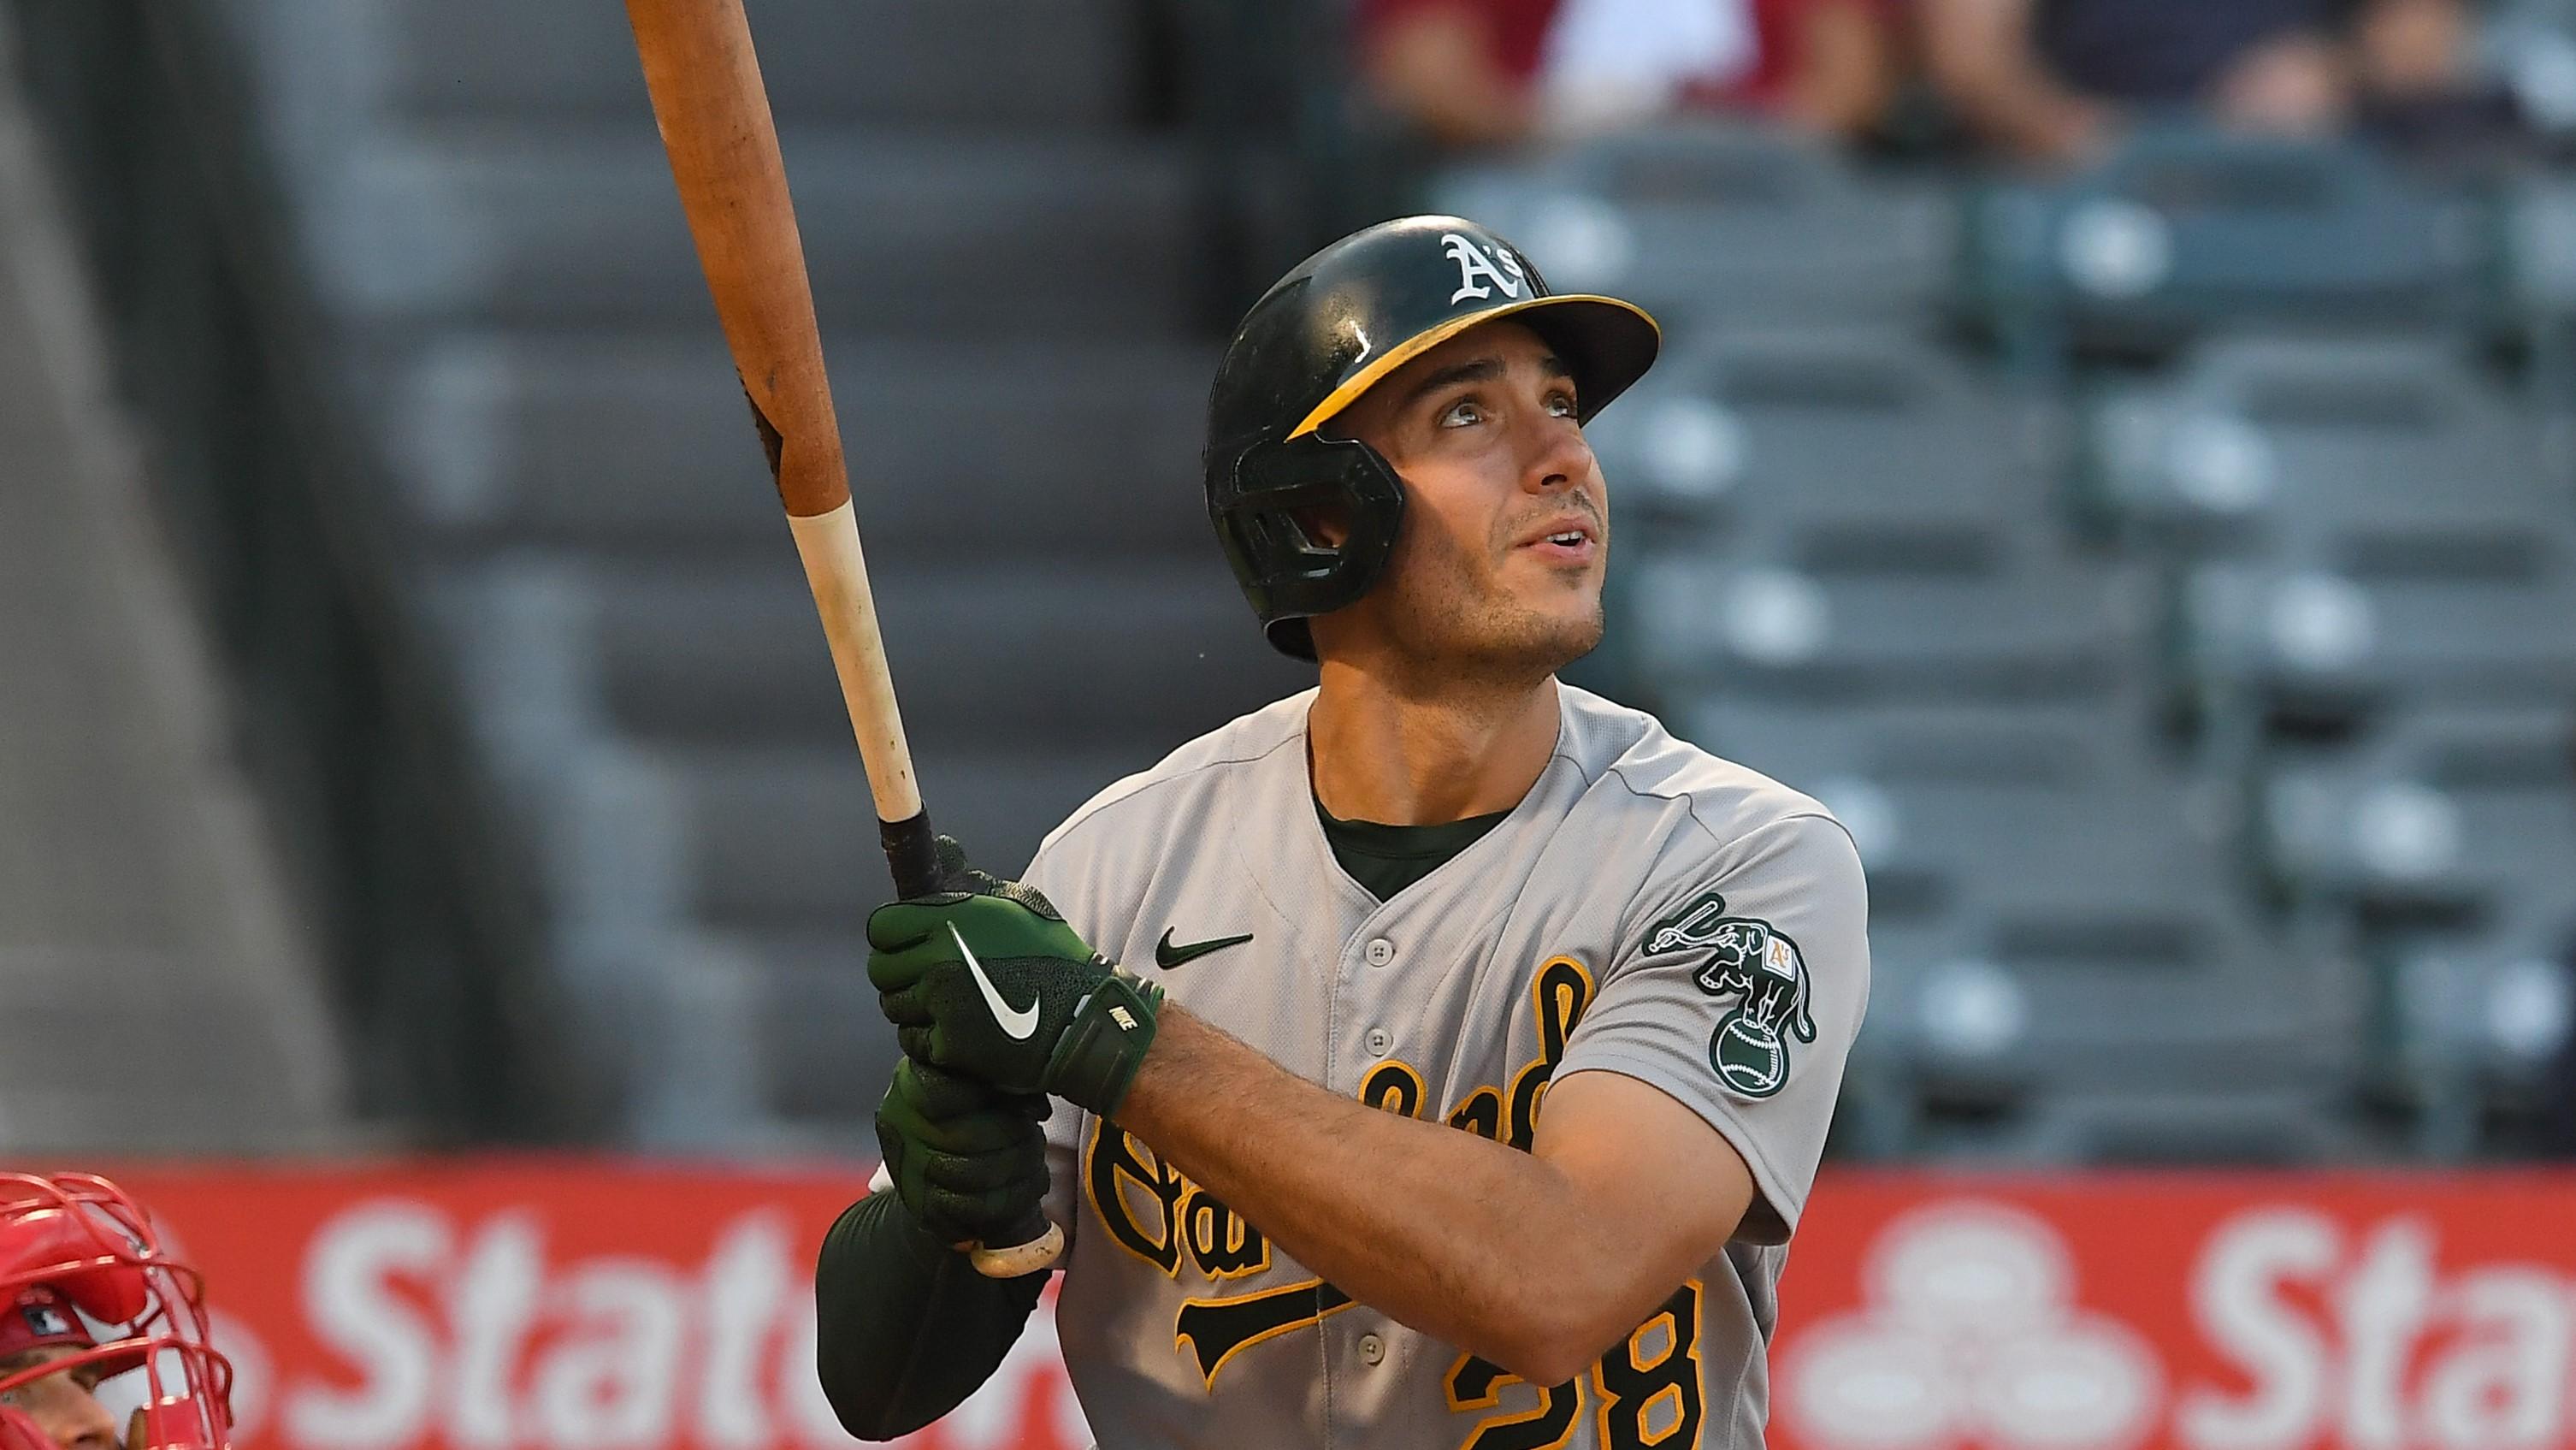 Oakland Athletics first baseman Matt Olson (28) hits a solo home run against the Los Angeles Angels in the first inning at Angel Stadium. / Jayne Kamin-Oncea-USA TODAY Sports